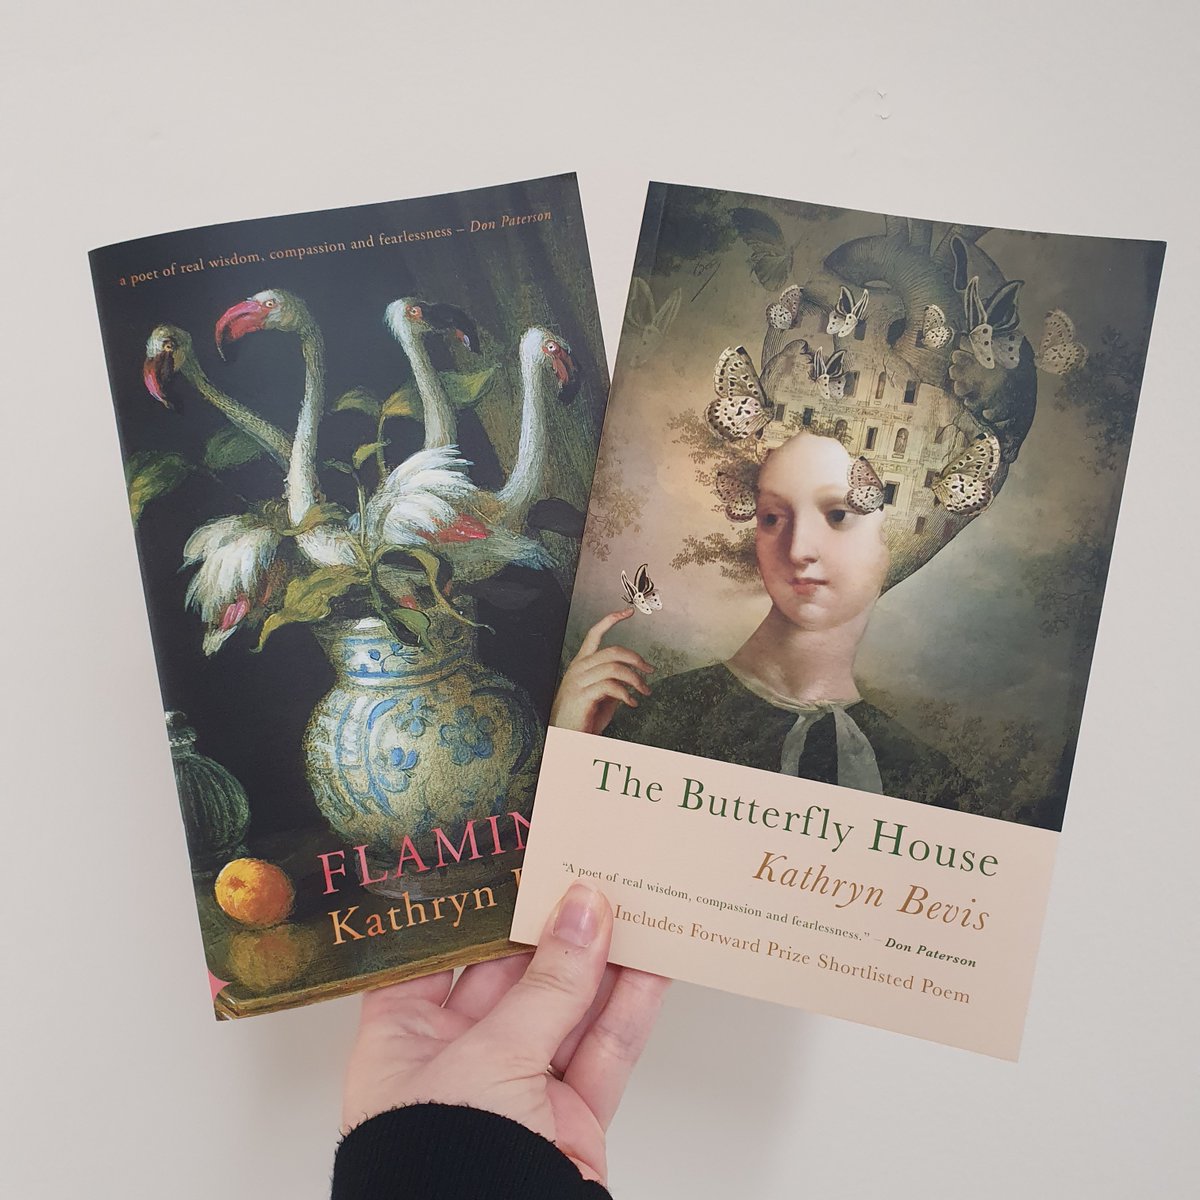 Available now: ‘The Butterfly House’ is @BevisKathryn’s highly anticipated debut collection. Described as “...an explosion of a book” by Joelle Taylor, you can order online or from your local bookshop now serenbooks.com/book/the-butte….